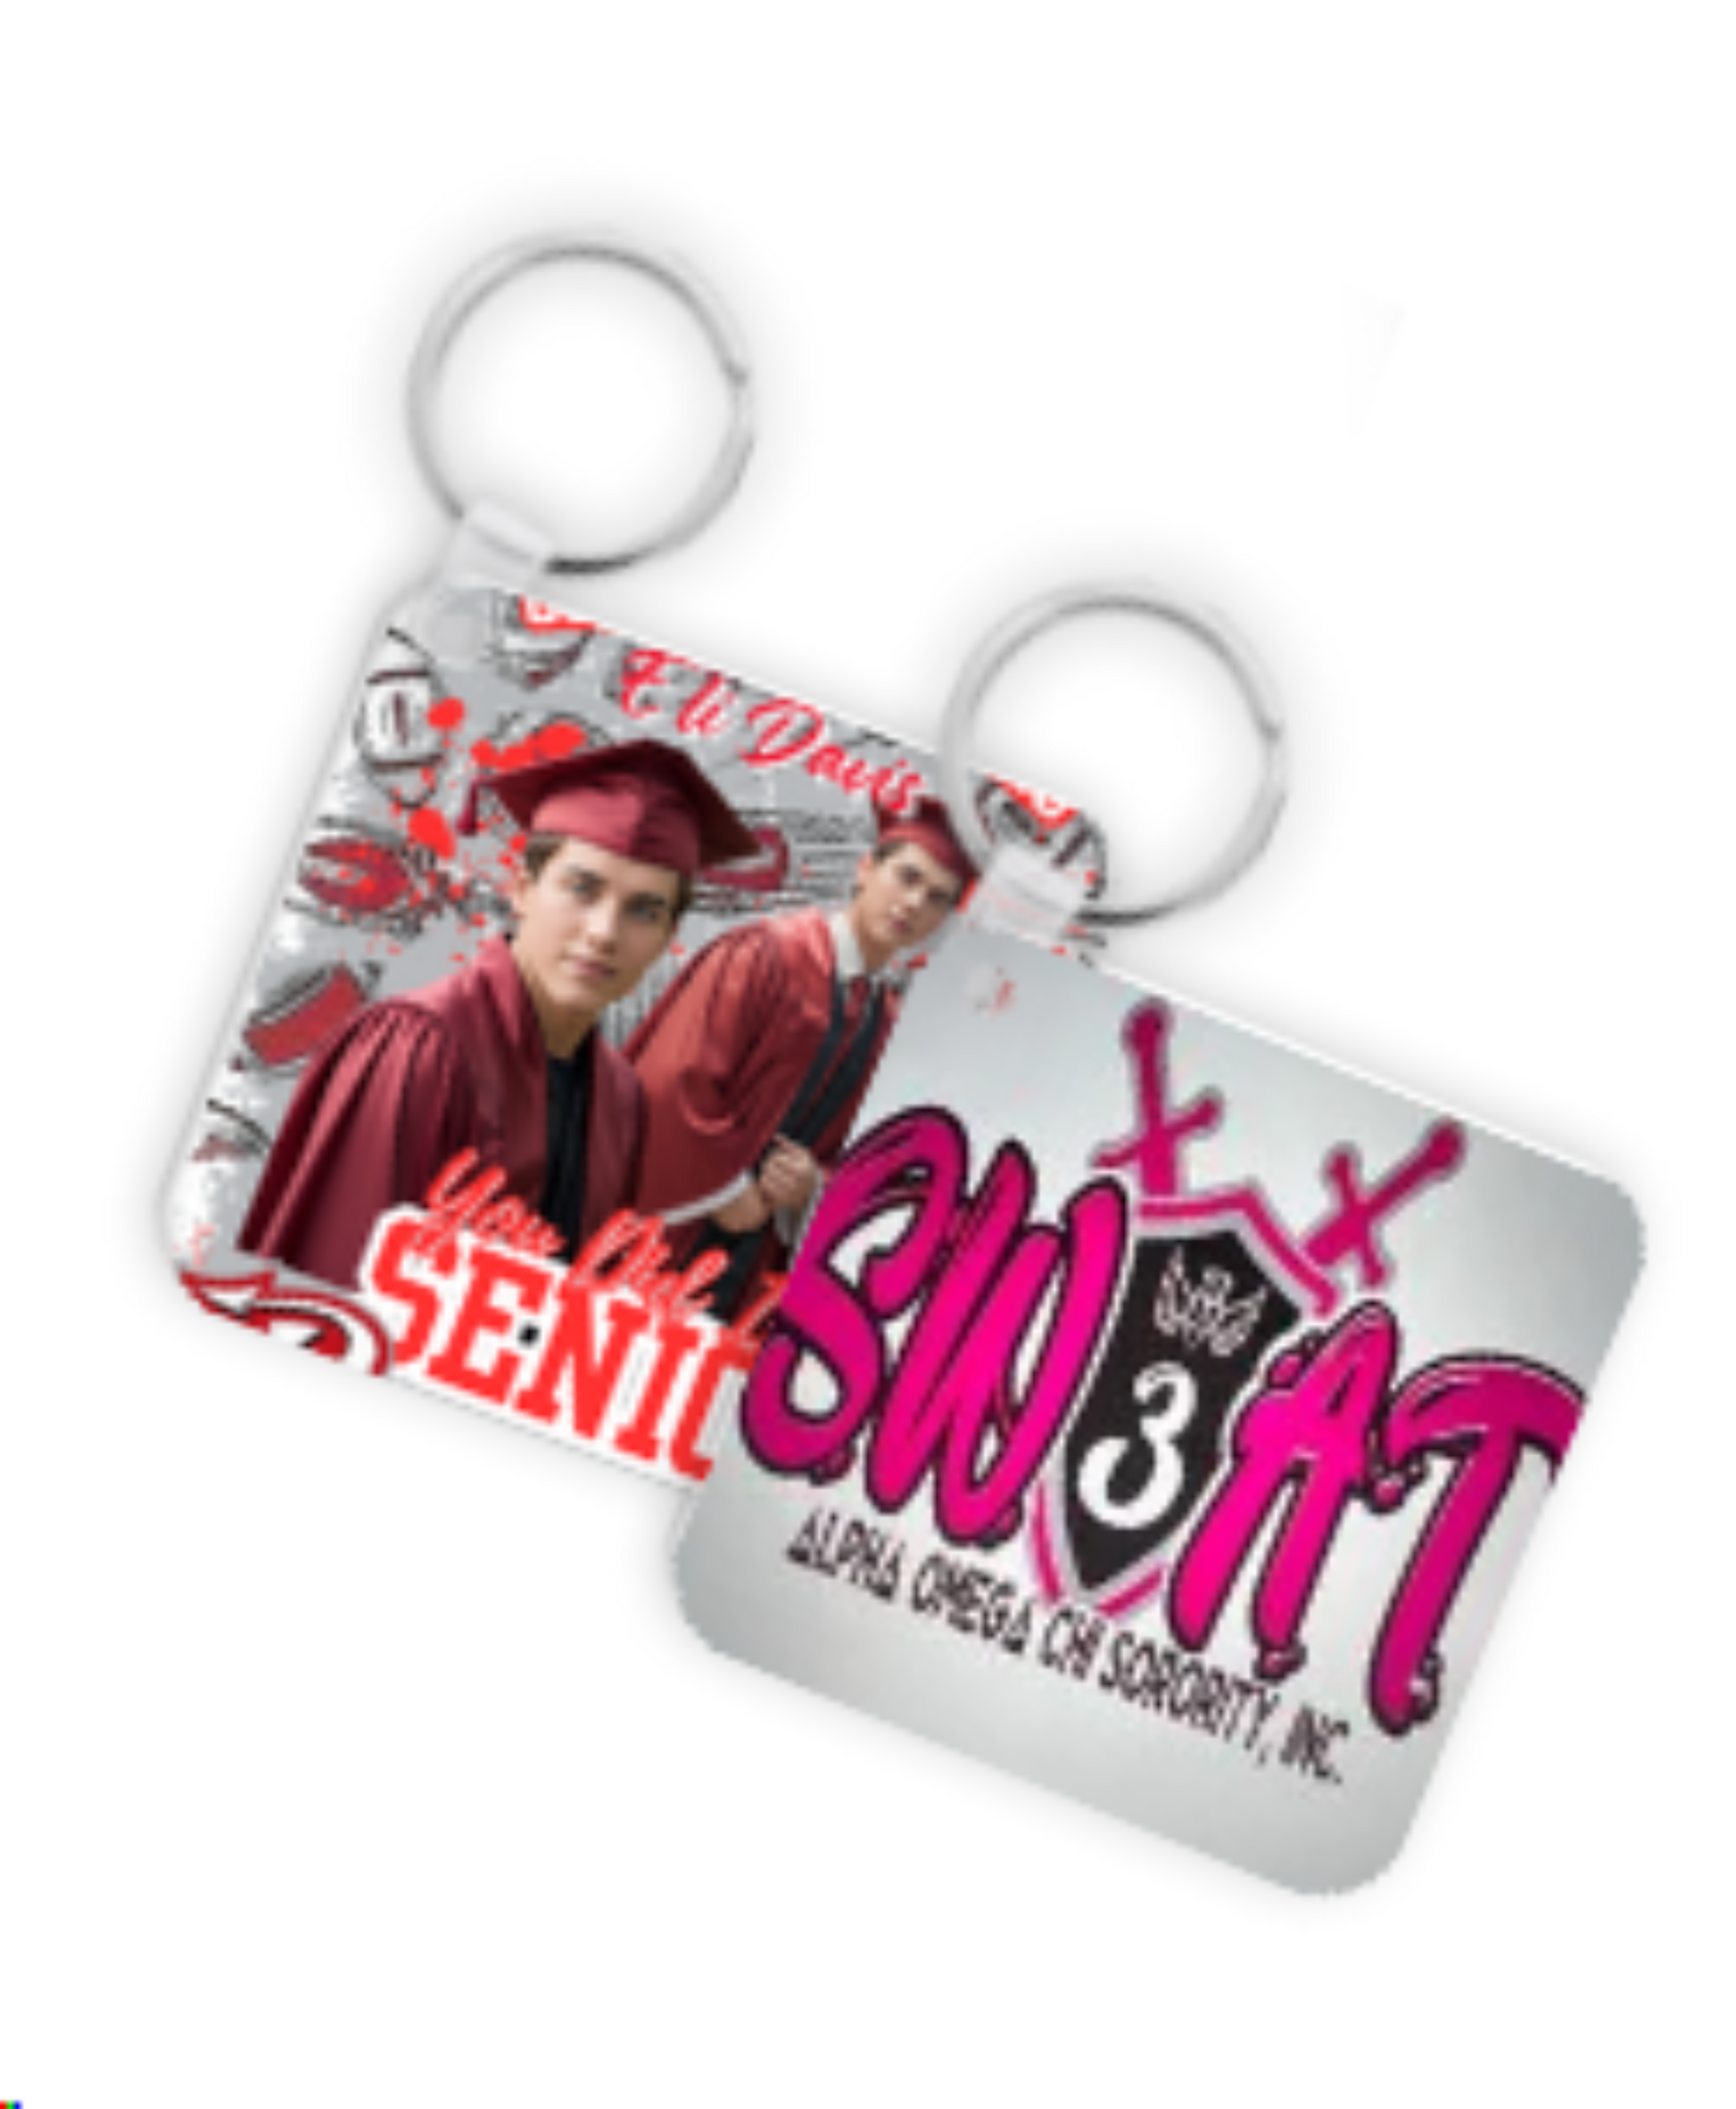 two keychains, one with a grad photo the other with a sorority graphic